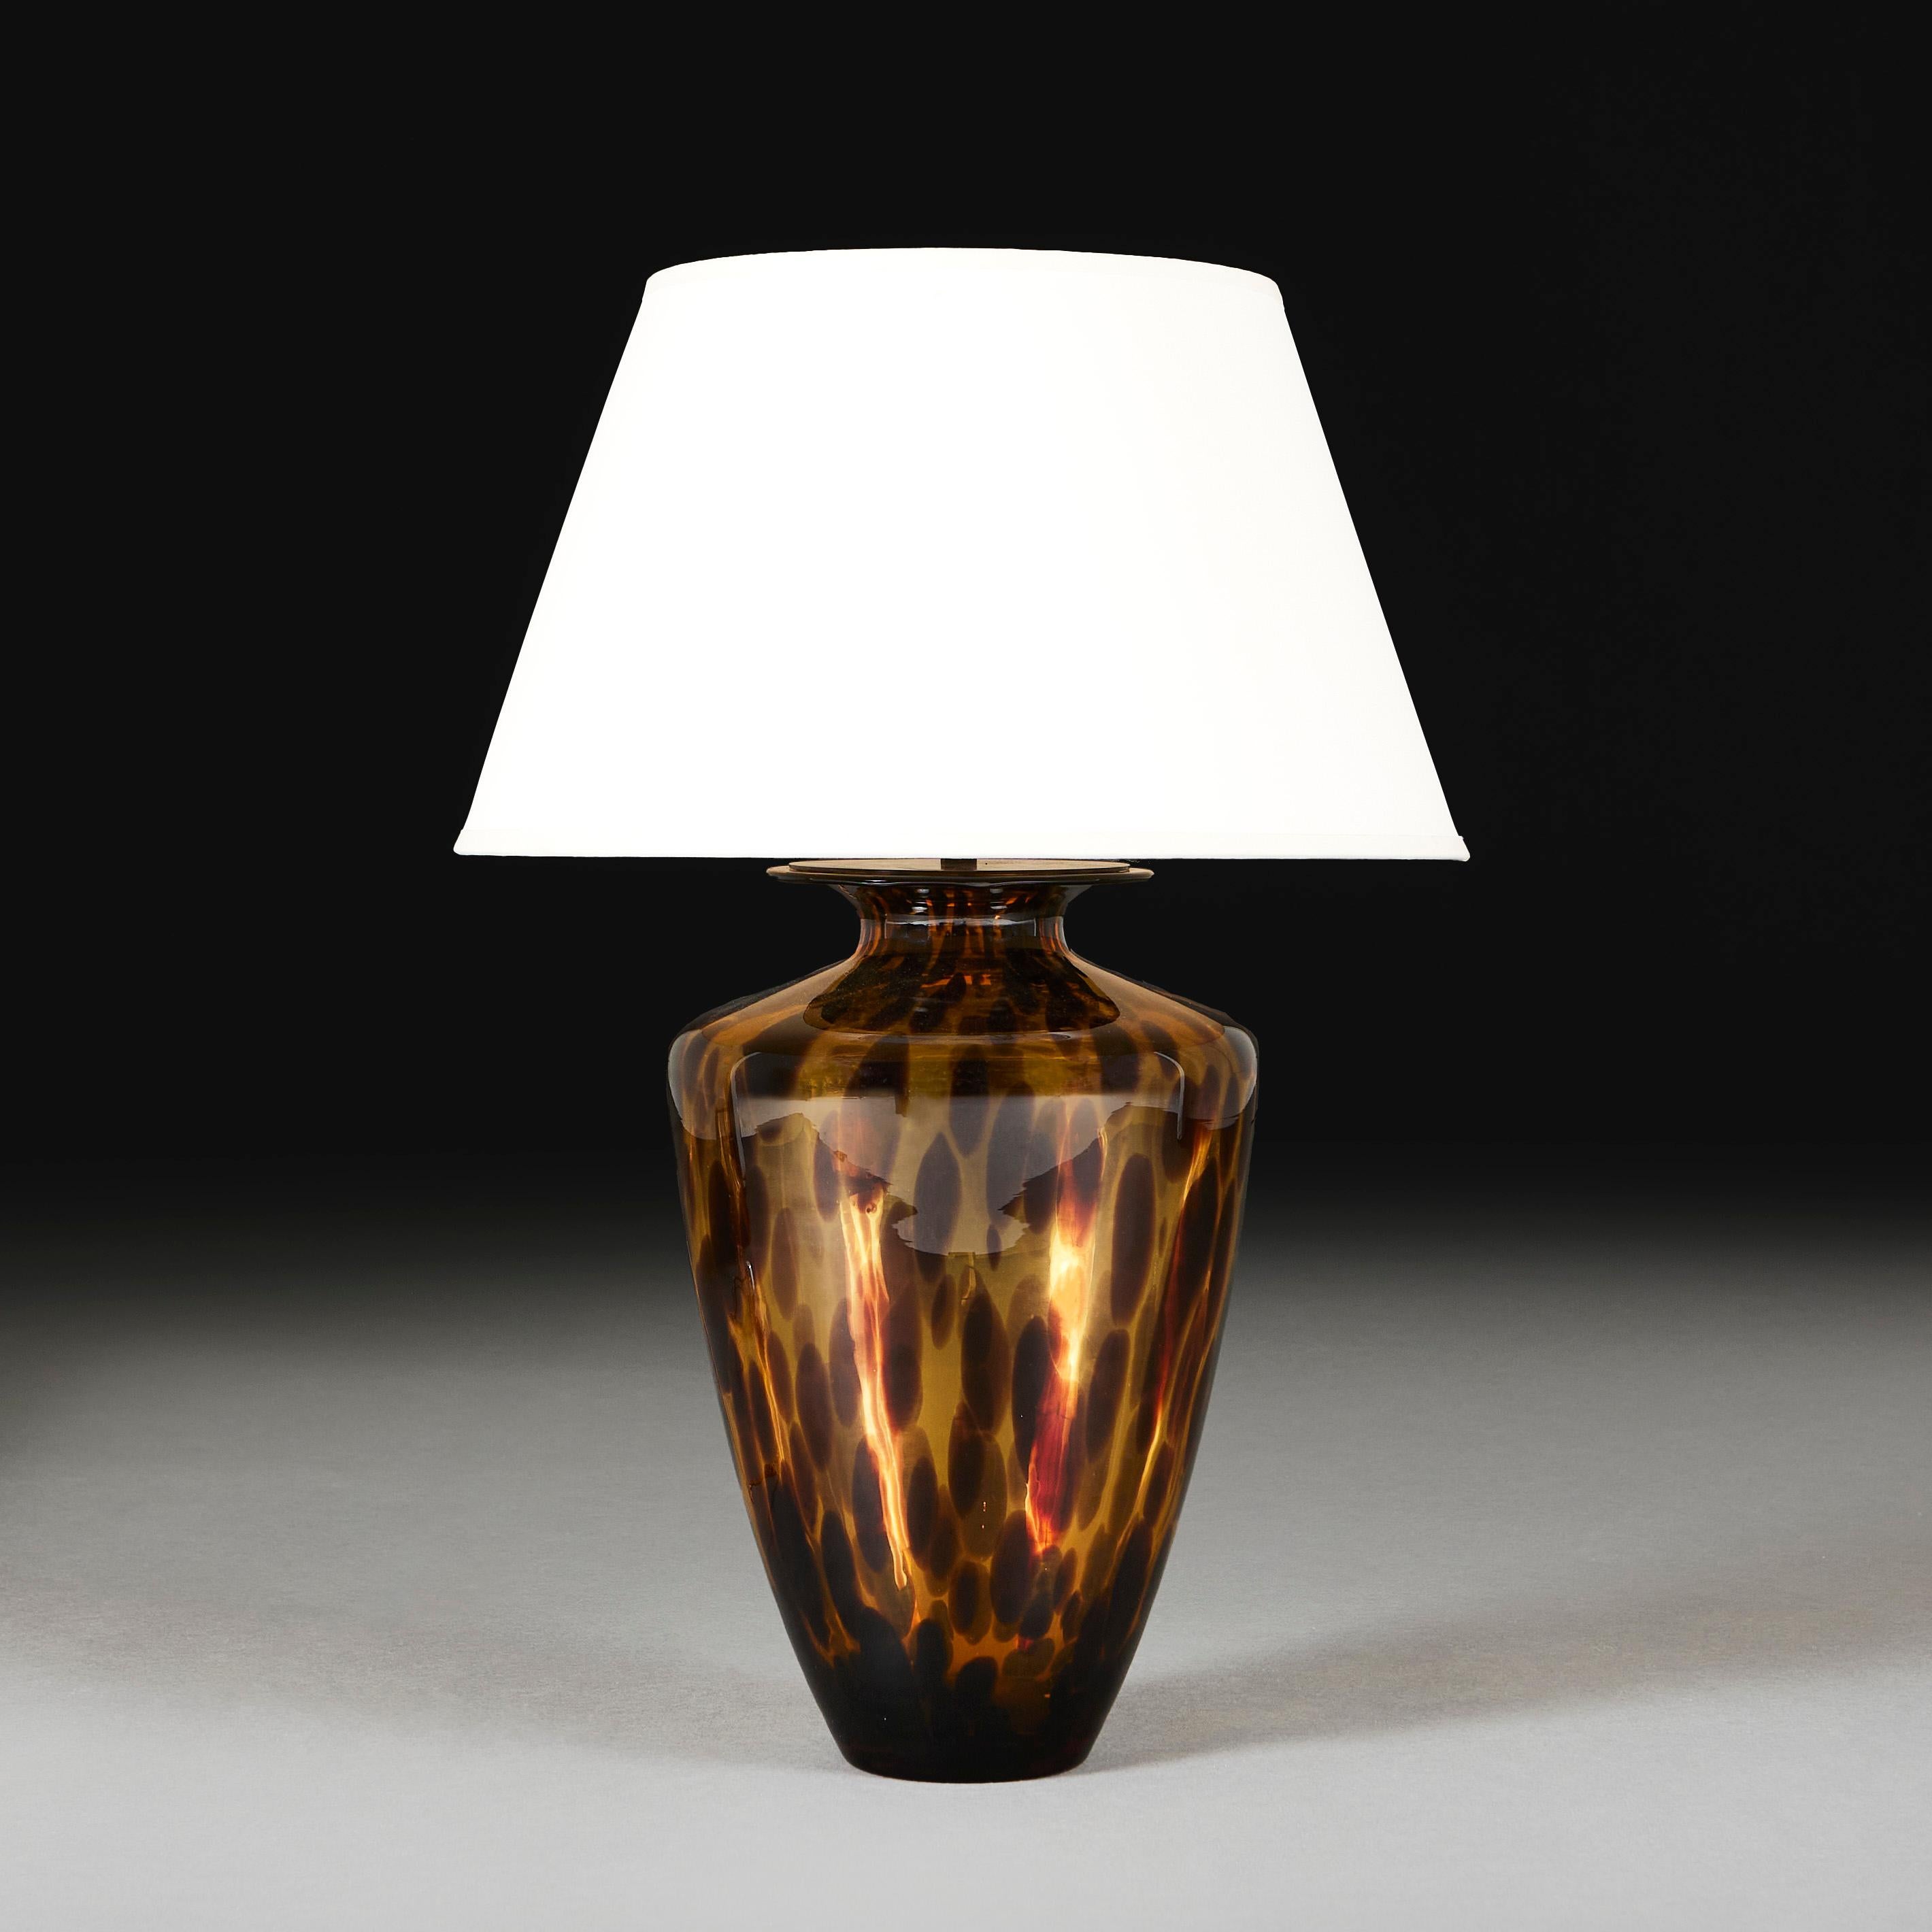 Italy, circa 1960

A mid 20th century Murano glass vase with speckled tortoiseshell pattern and flared rim, now mounted as a lamp. 

Please note: 

Photographed with a 16” diameter pale cream card lampshade.

This is currently wired for the UK with